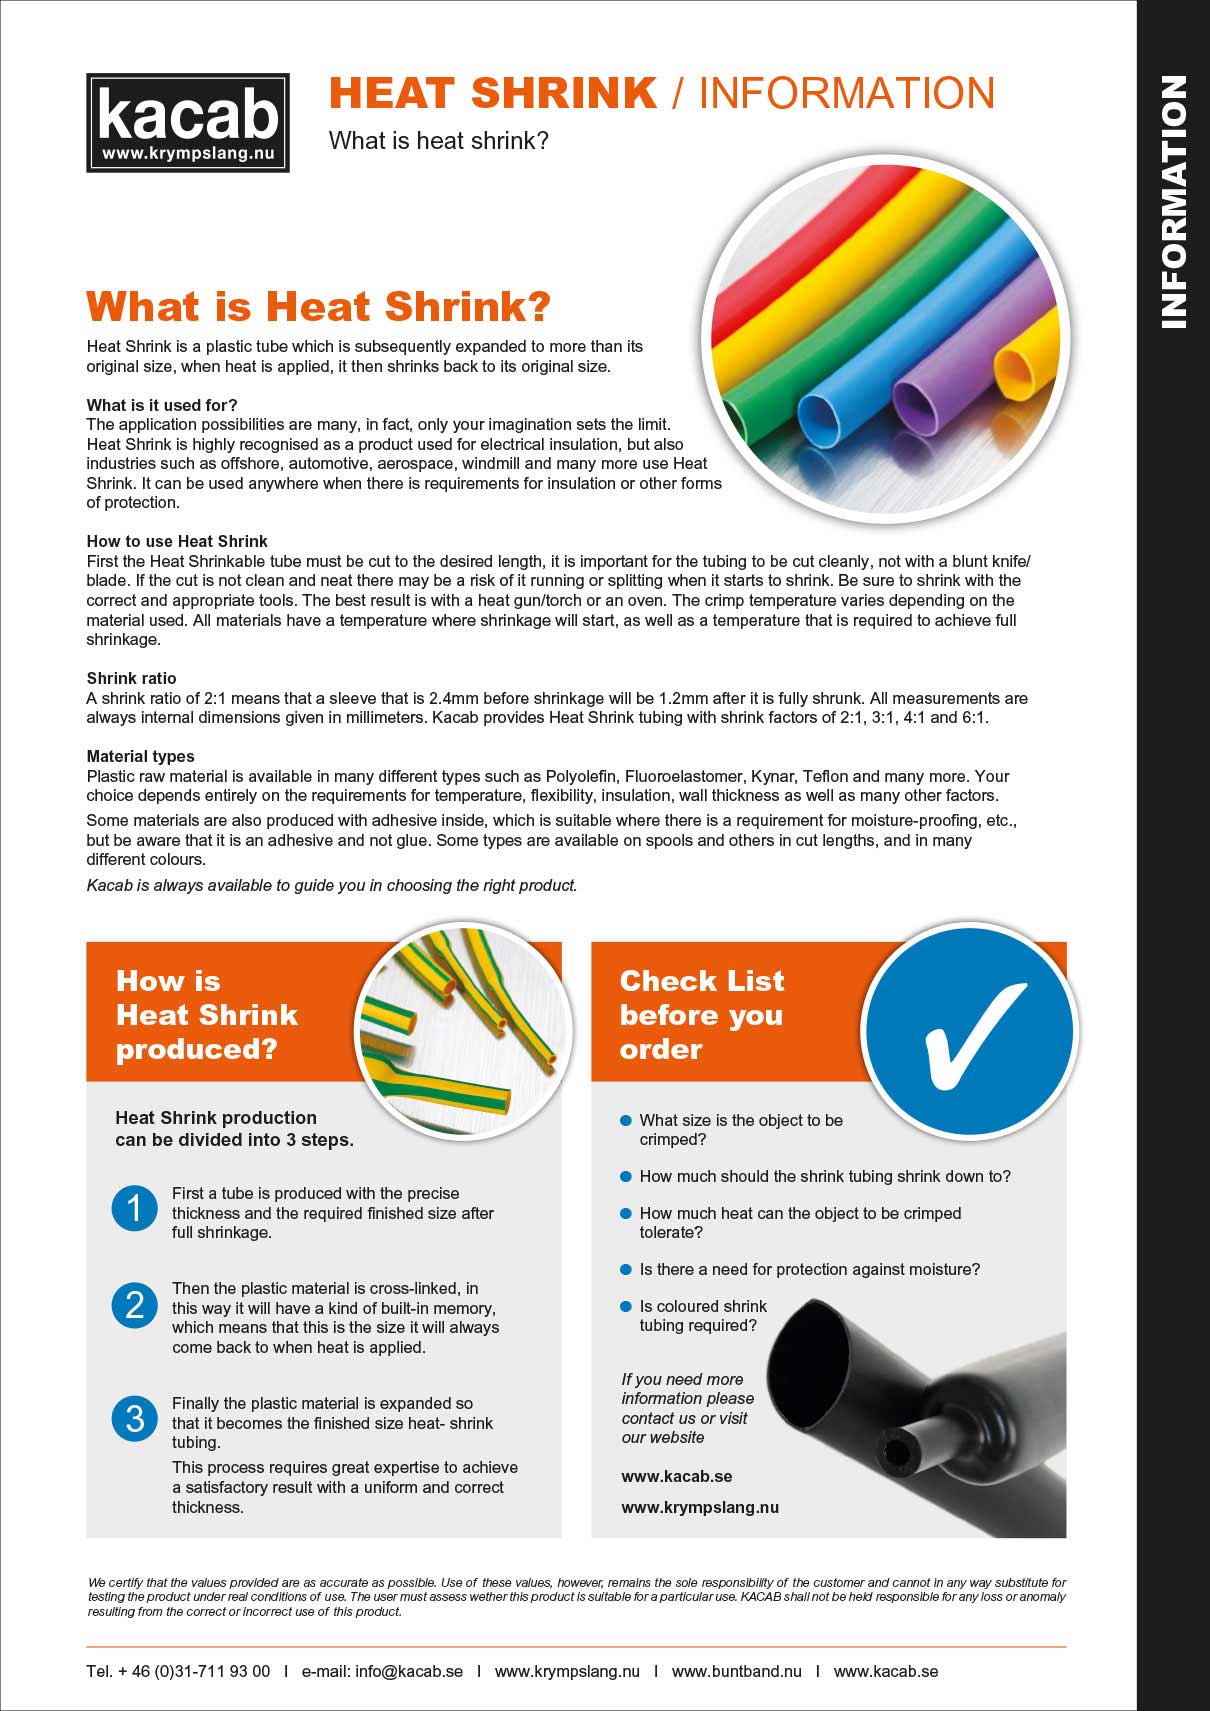 Guide to our Heat Shrink Tubing